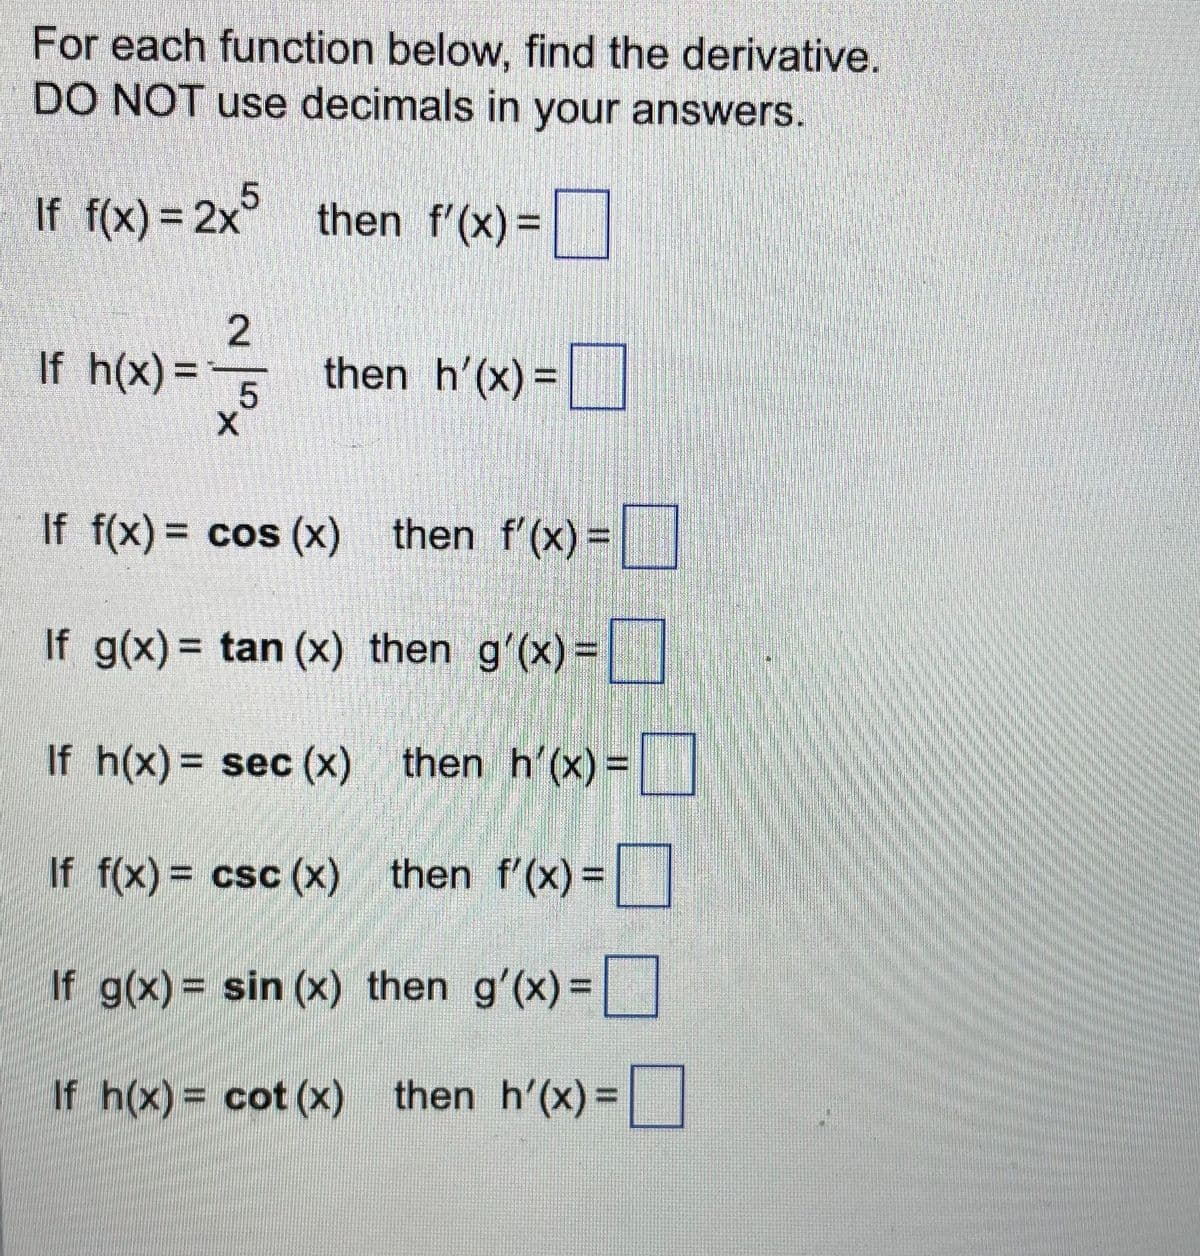 For each function below, find the derivative.
DO NOT use decimals in your answers.
If f(x) = 2x5 then f'(x)=
23/3
5
X
If h(x) = -
then h'(x) =
If f(x) = cos(x) then f'(x) =
If g(x) = tan (x) then g'(x) =
If h(x) = sec (x) then h'(x)=
If f(x) = csc (x) then f'(x)=
If g(x) = sin(x) then g'(x)=
If h(x) = cot (x) then h'(x)=